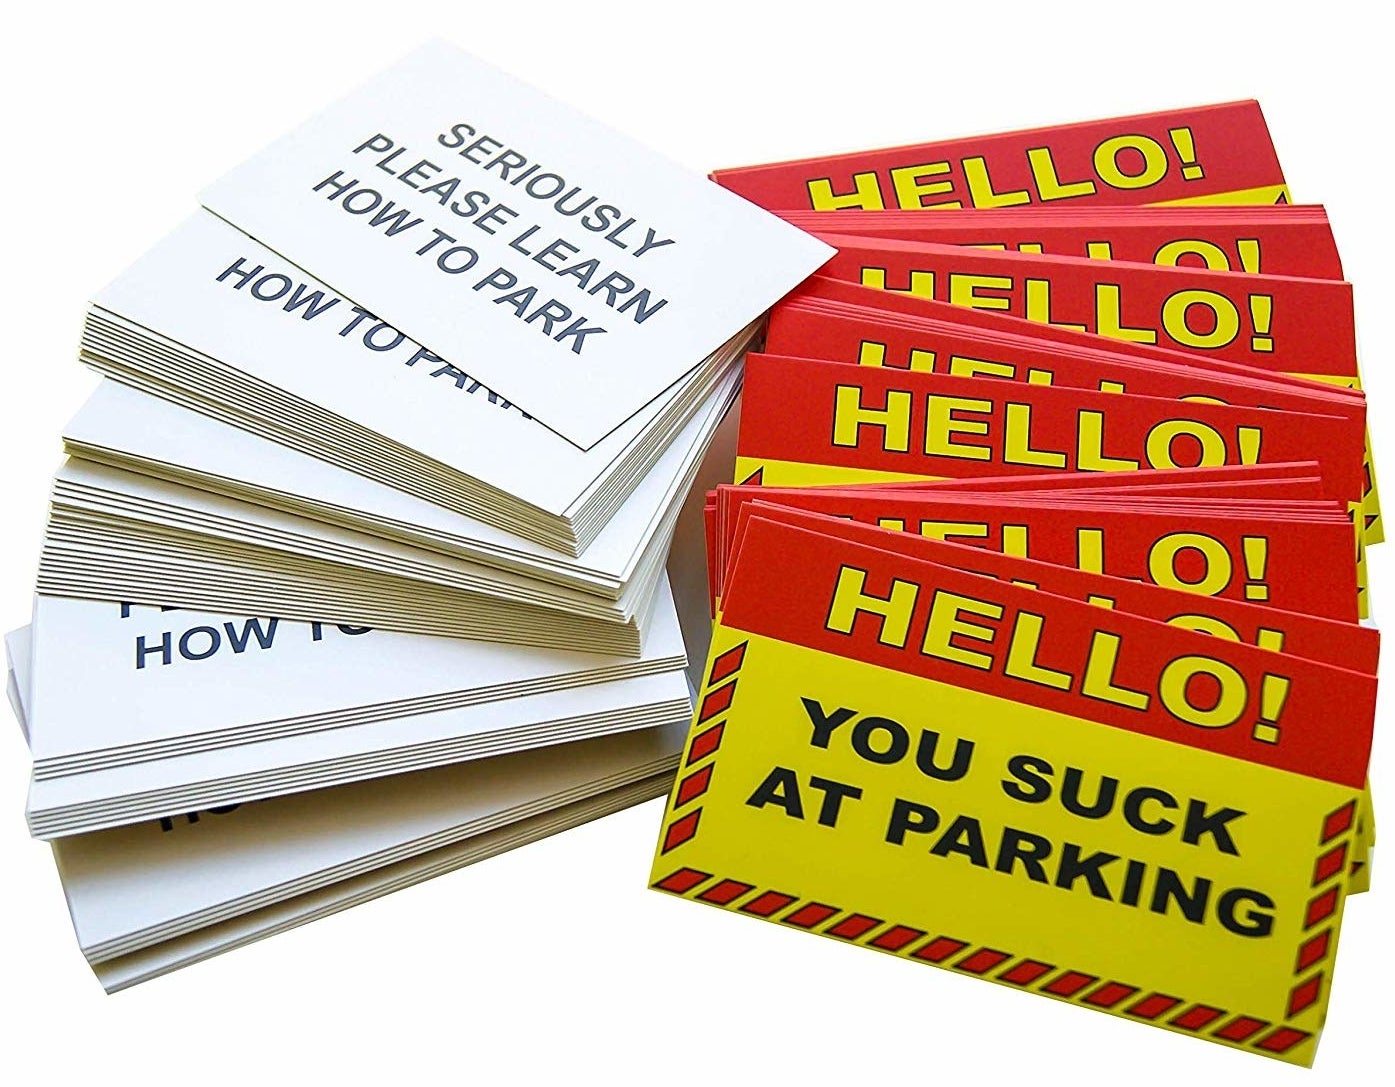 cards that says hello you suck at parking and seriously learn how to park